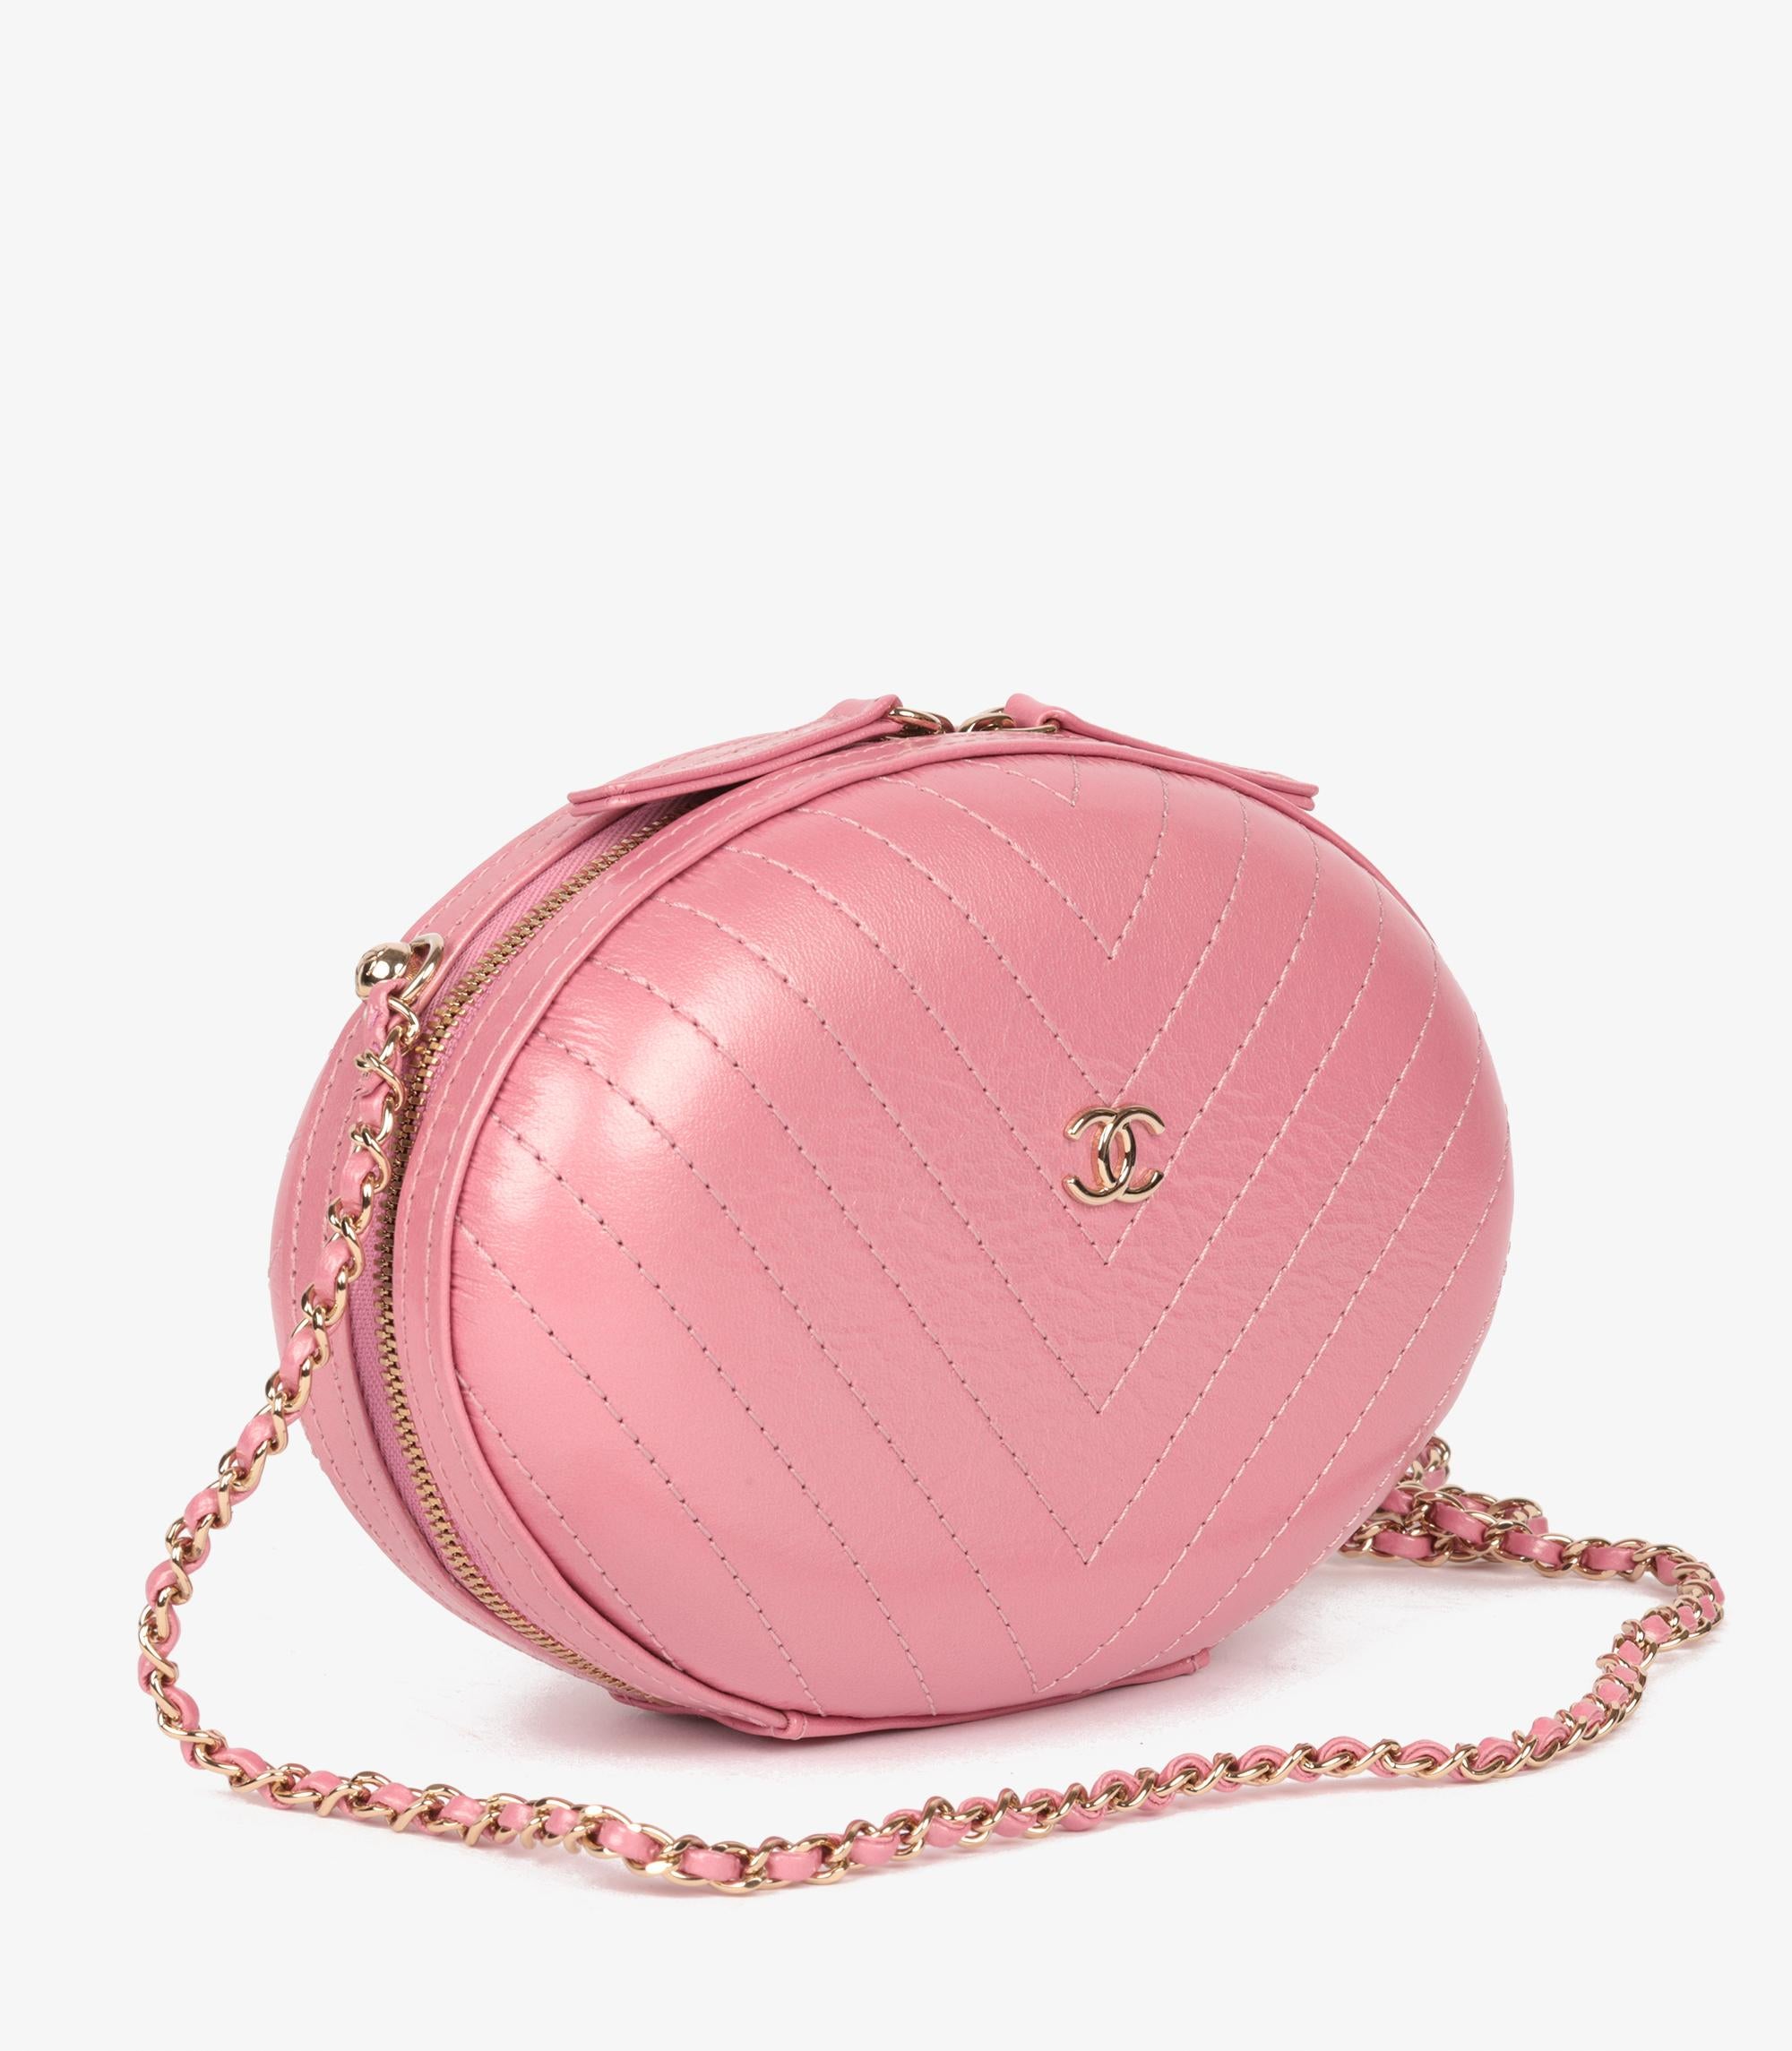 Chanel Pink Chevron Quilted Shiny Calfskin Leather La Pausa Classic Evening Bag In Excellent Condition For Sale In Bishop's Stortford, Hertfordshire